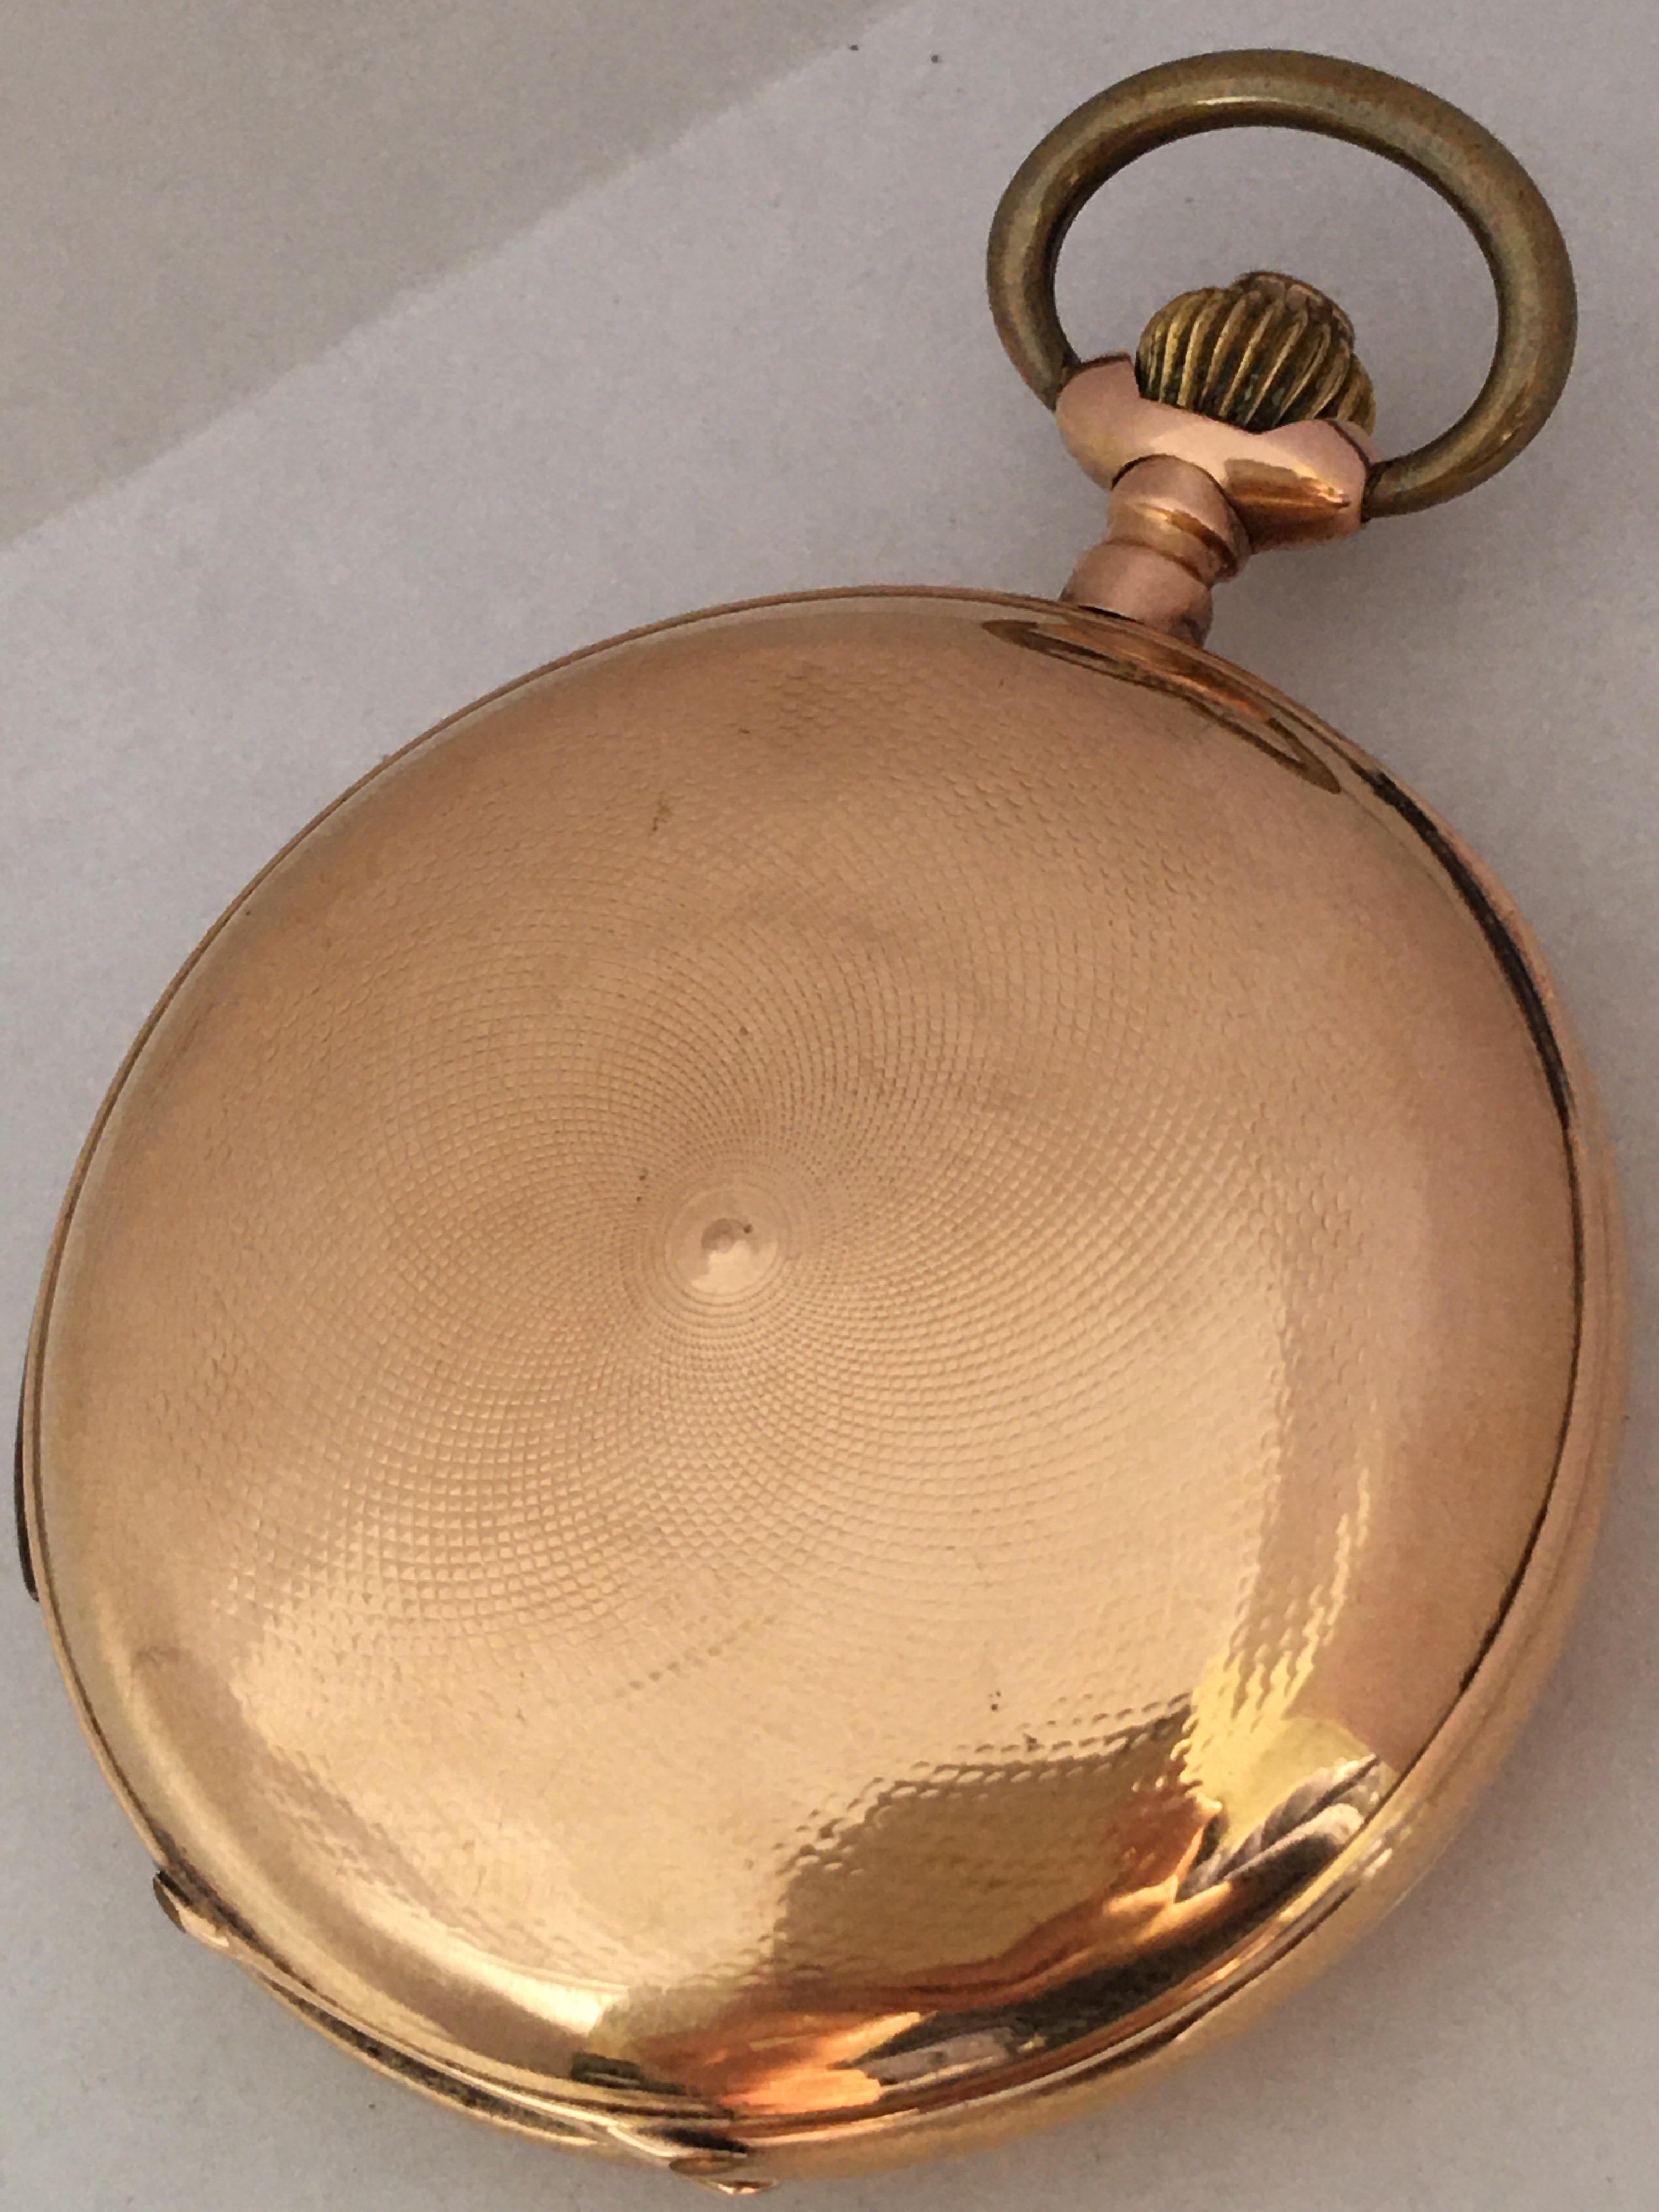 This beautiful antique gold quarter repeating hand winding pocket watch is in good working condition and it is ticking well. Visible signs of ageing and wear with some light dents on the gold watch case(front and back cover) as shown and some